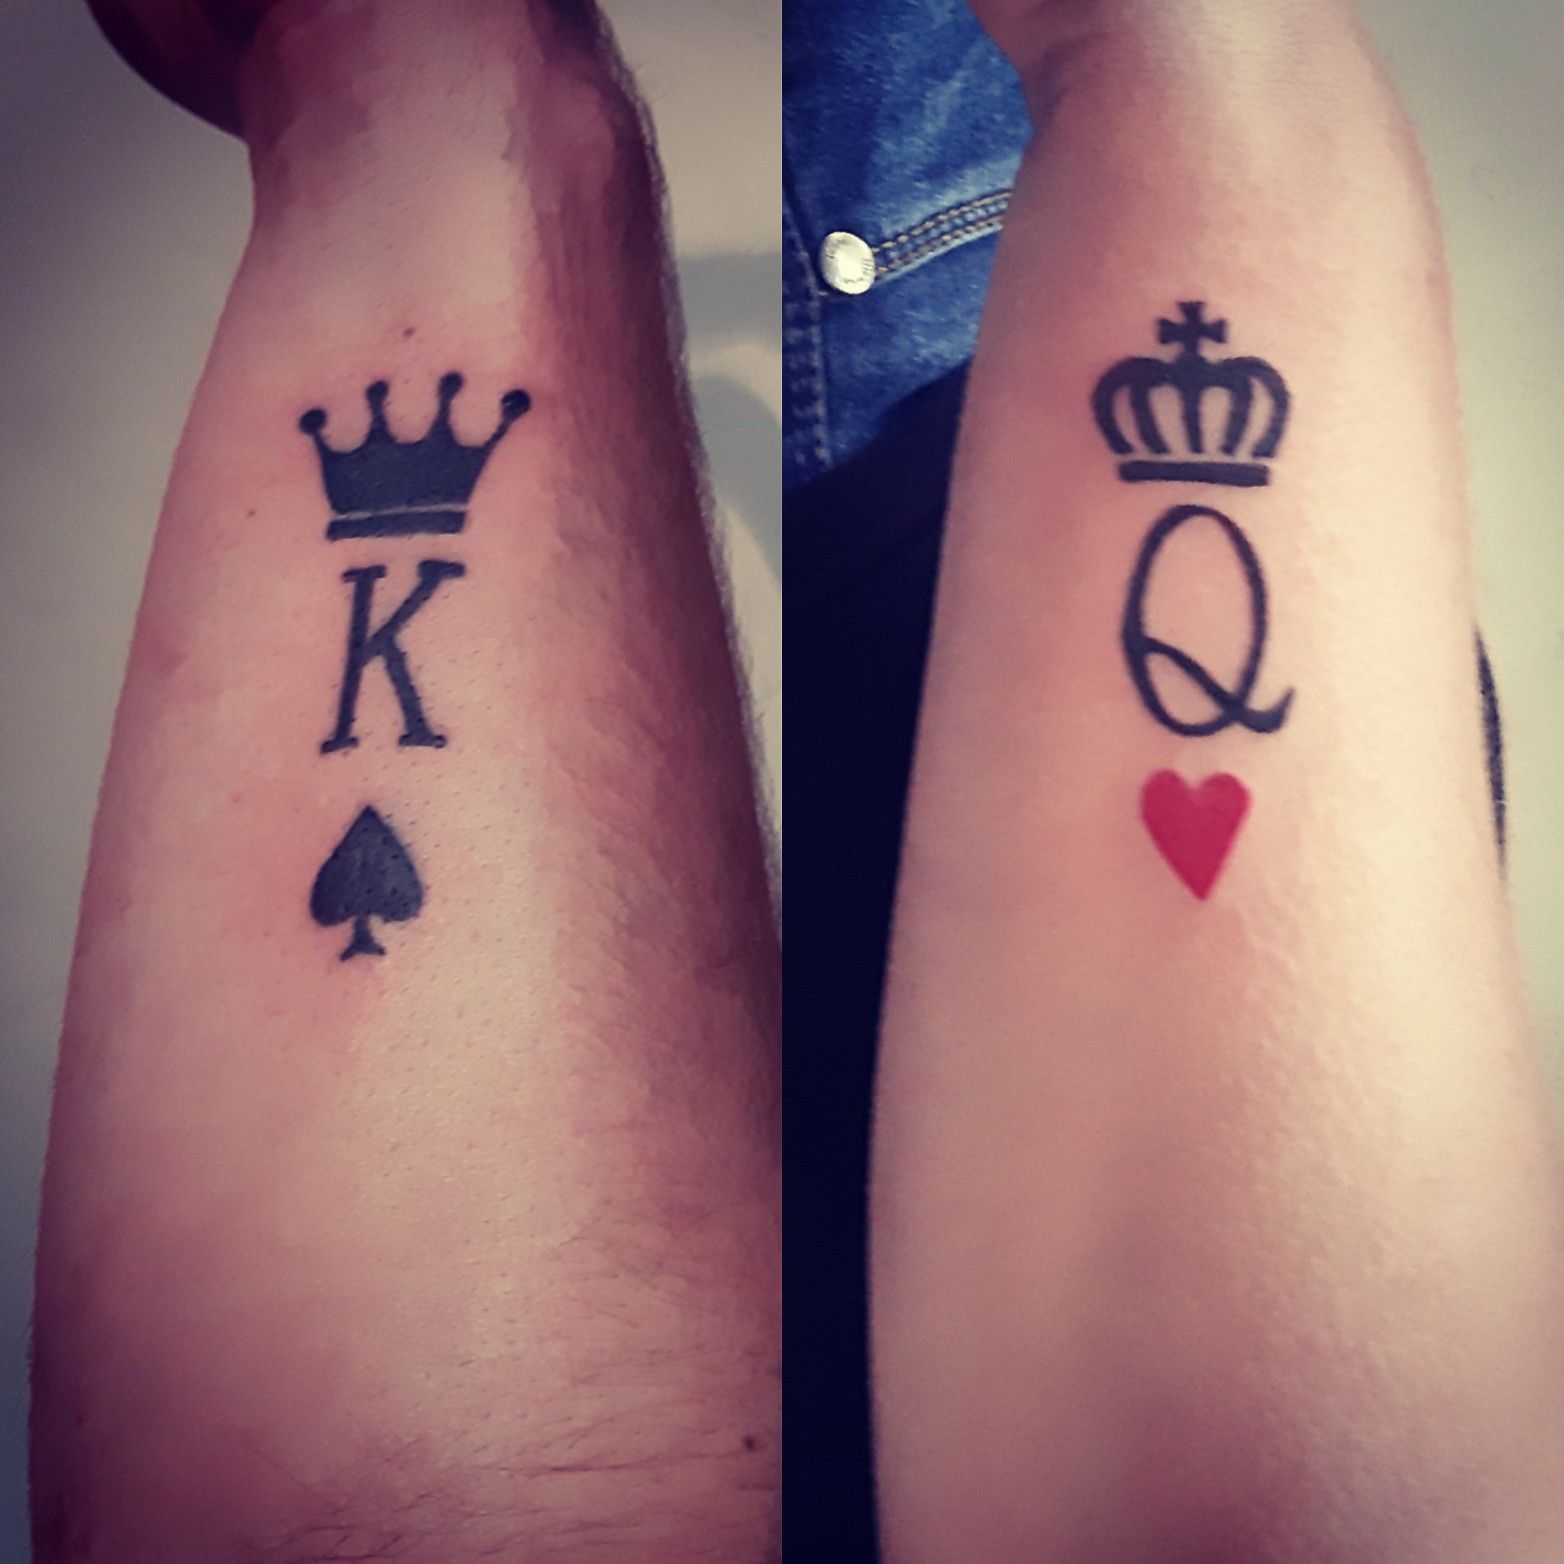 An example of a king and queen couple tattoo